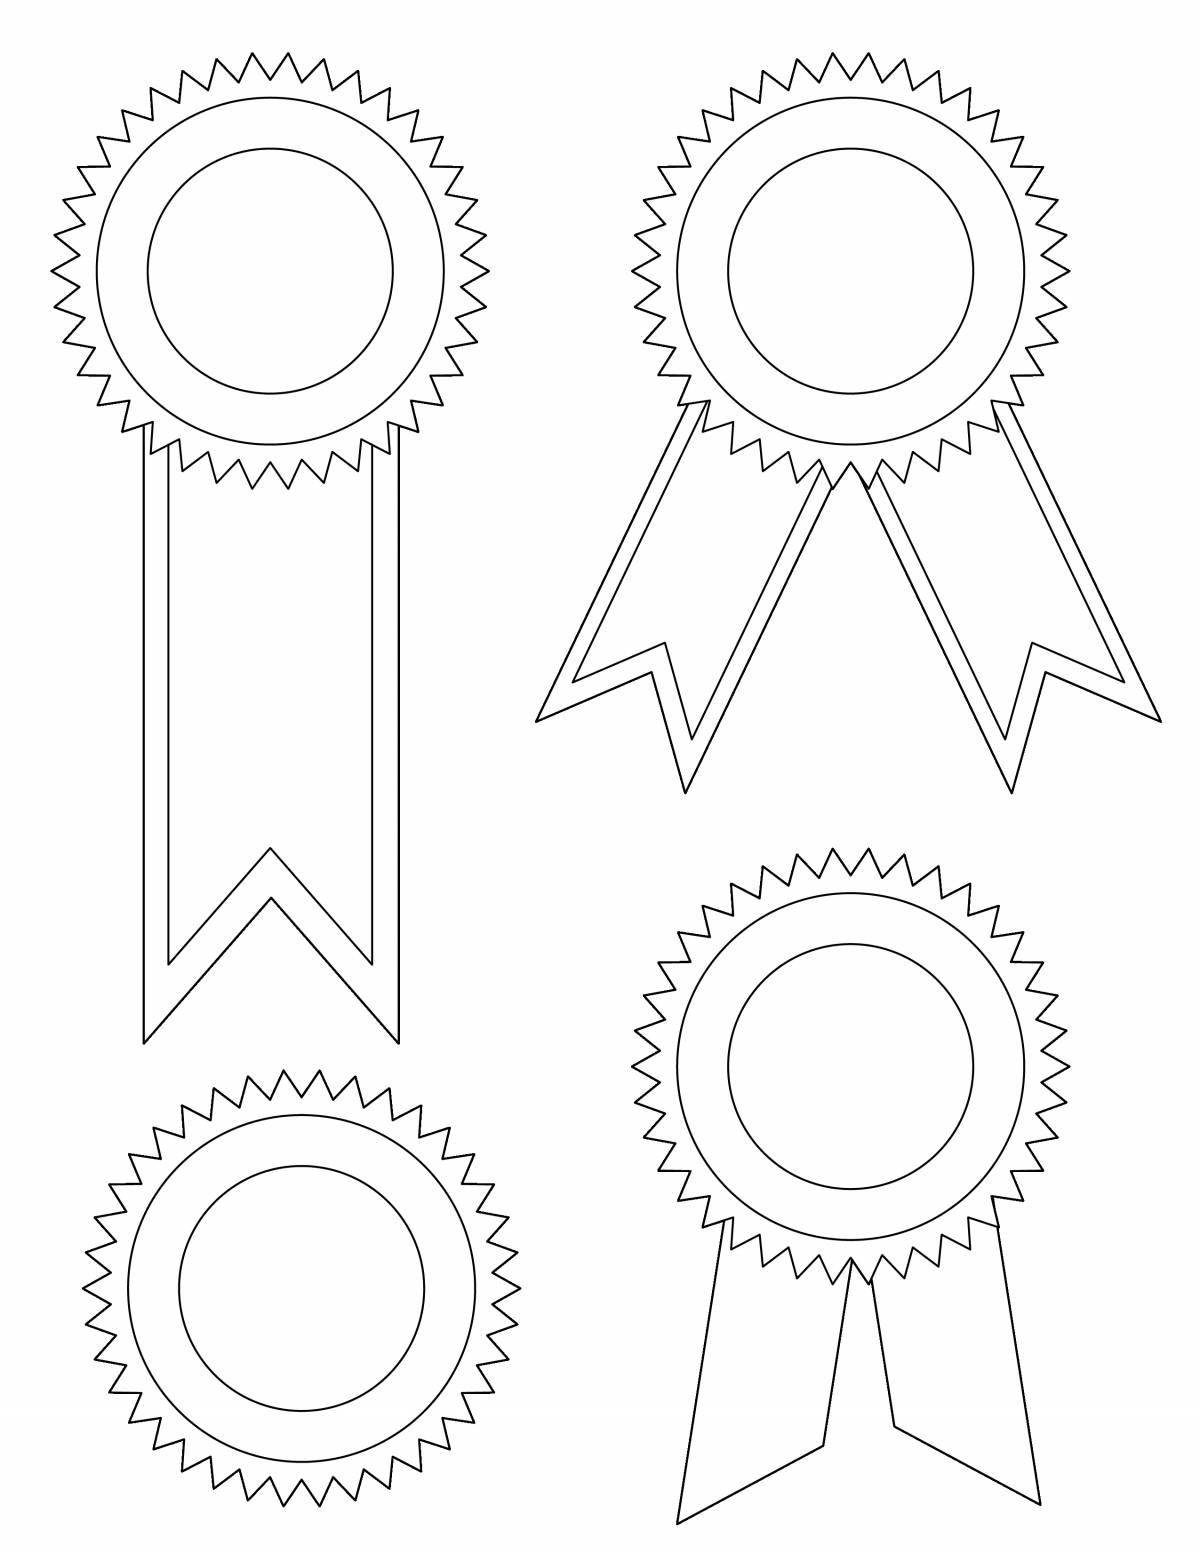 Adorable medal template for February 23rd